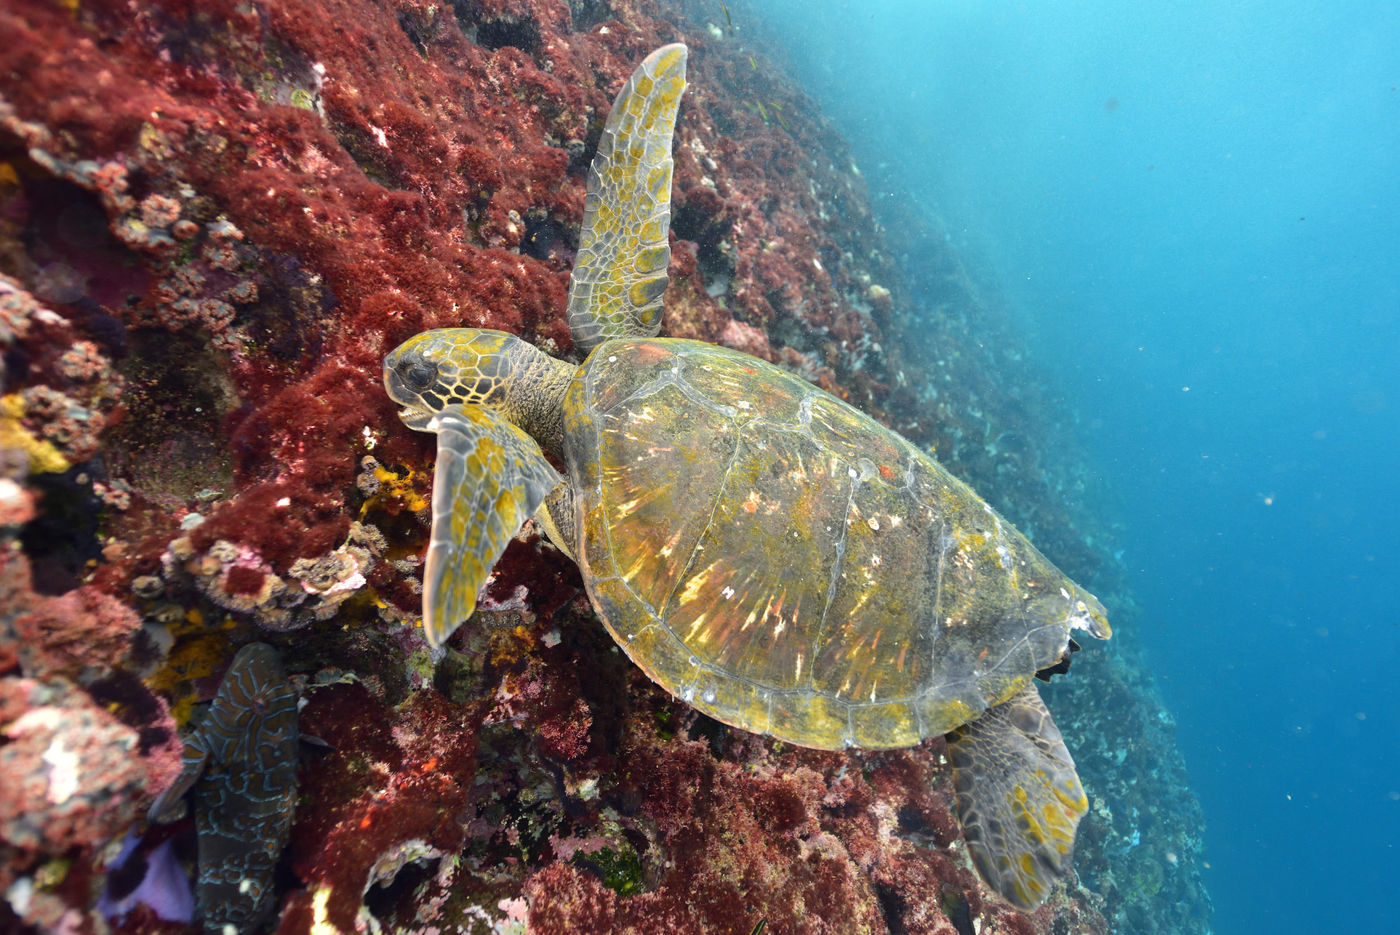 It aren't only the iguanas but also the green sea turtles that feast on the algae. © Yves Adams